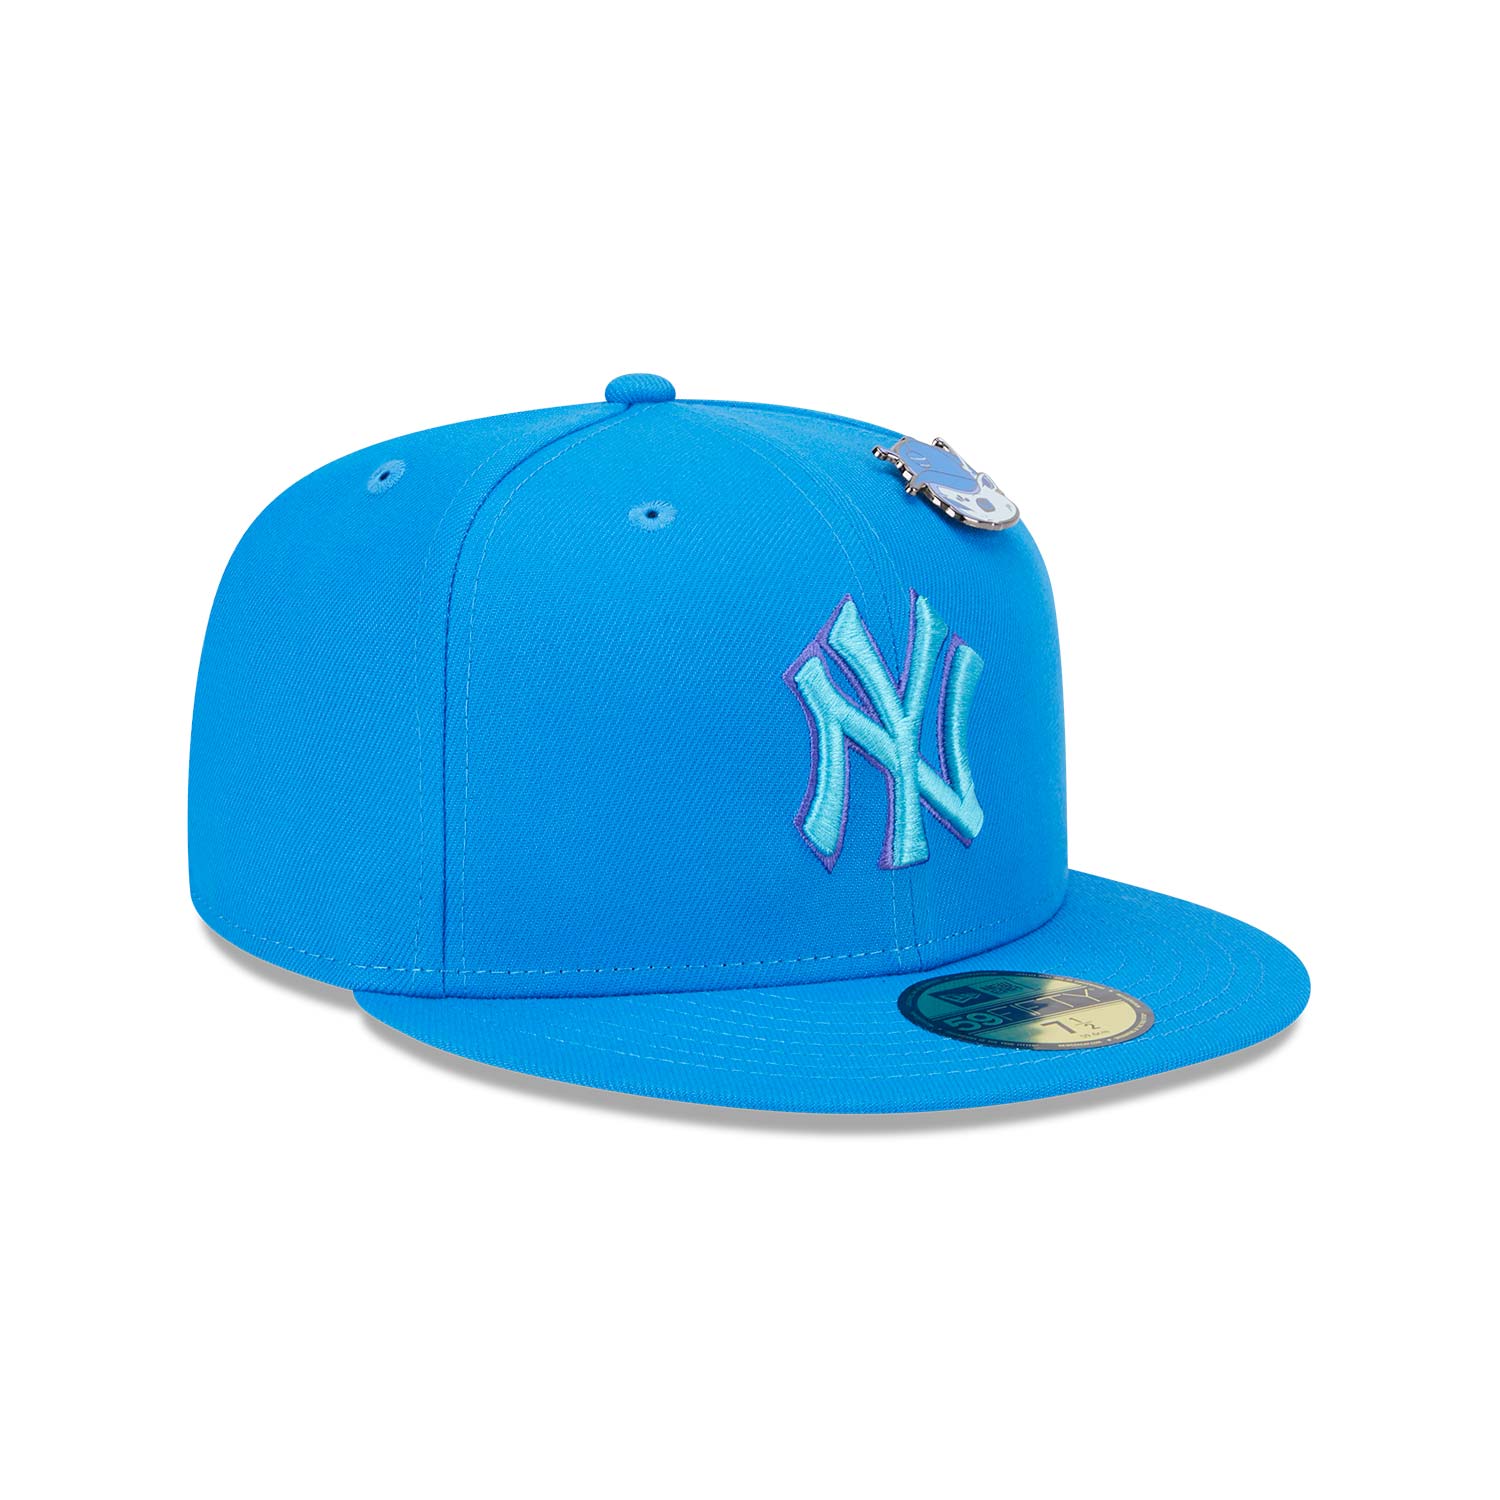 NEW YORK METS OUTER SPACE PACK NEW ERA FITTED HAT  Sports World 165